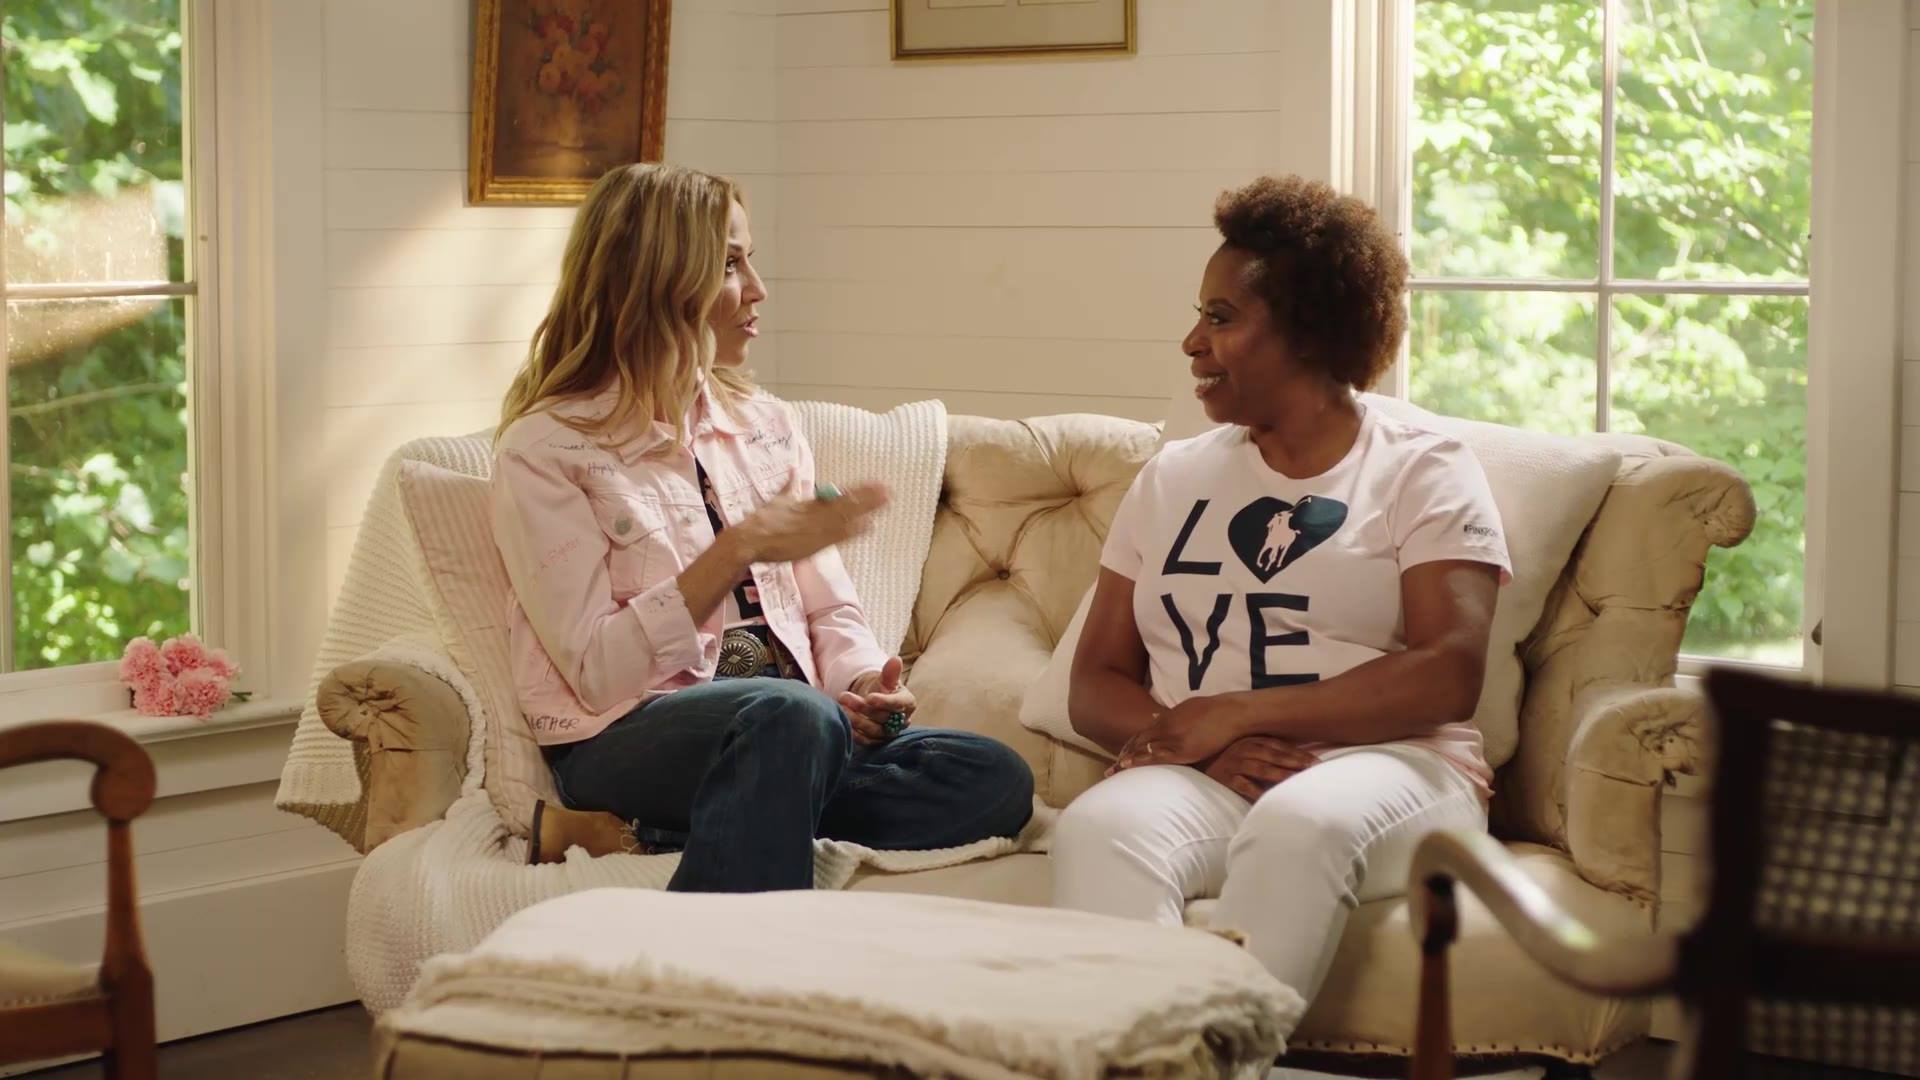 Pink Pony 2019 | Sheryl Crow and Nevette Tyus Middleton For our 2019 Pink Pony campaign, Sheryl Crow welcomed ten people touched by cancer to her home to talk about cancer – including Nevette Tyus Middleton, an ovarian cancer survivor and advocate